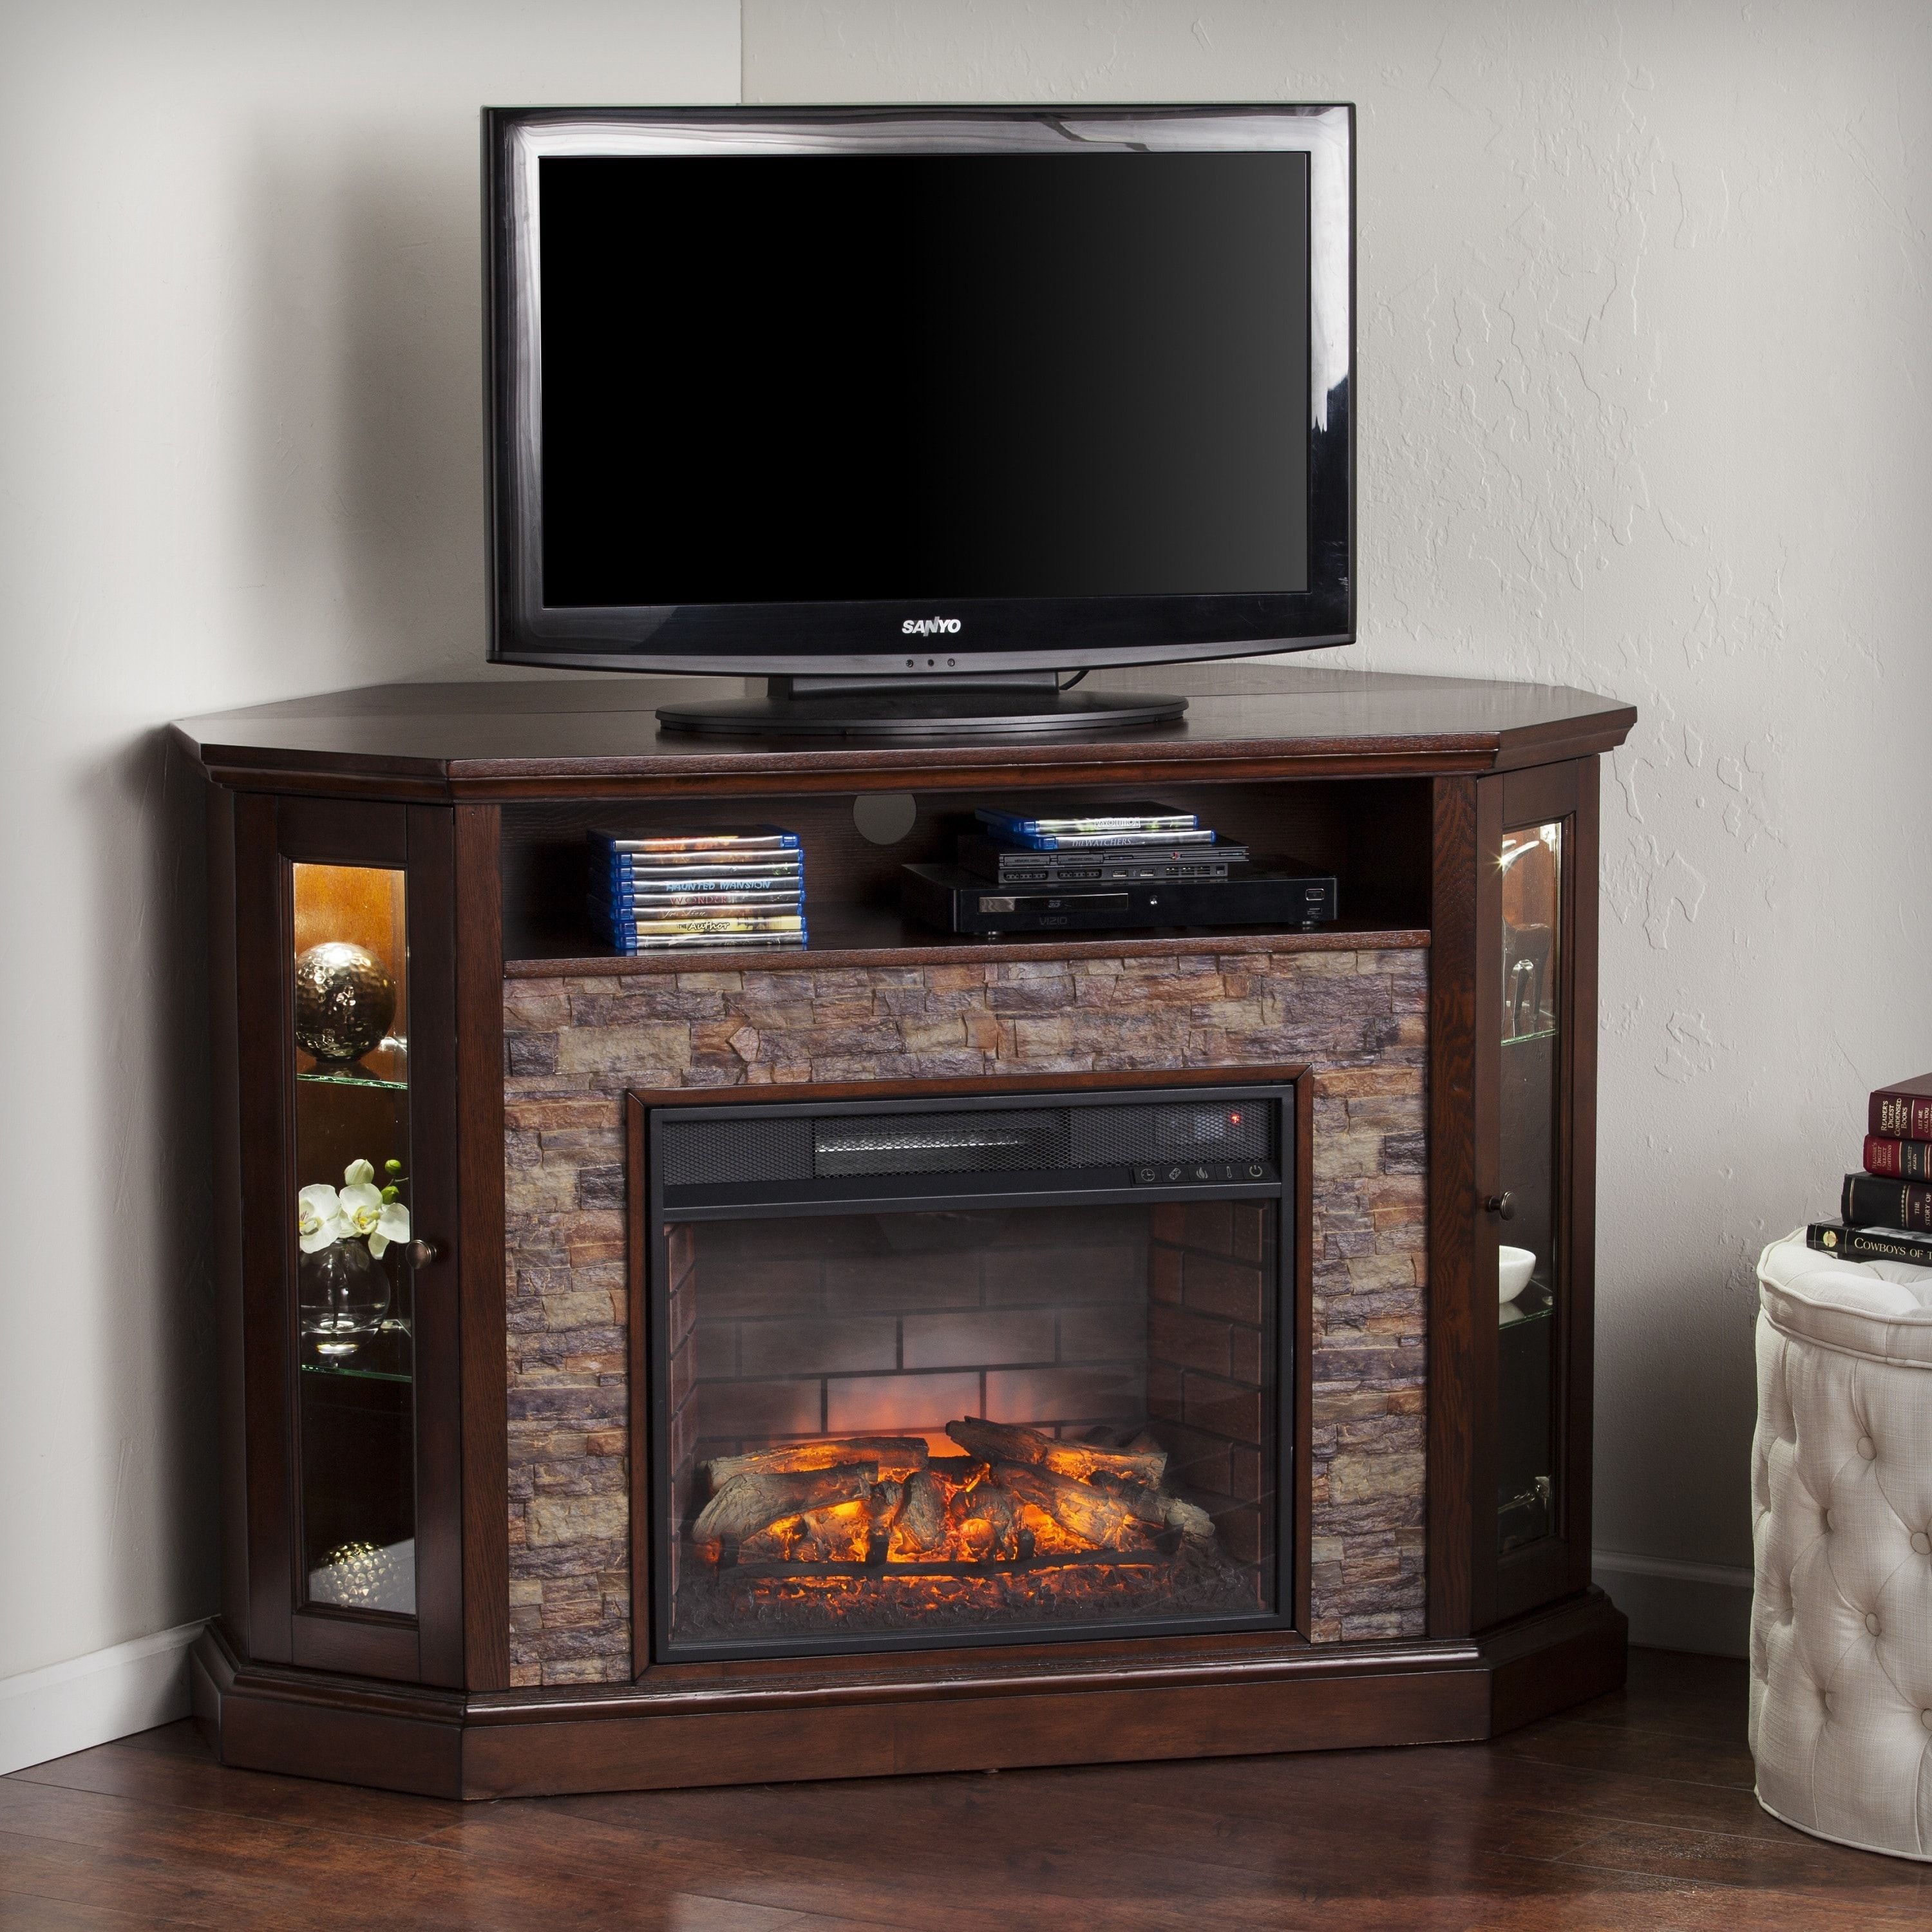 Large Electric Fireplace Tv Stand Beautiful Harper Blvd Ratner Faux Stone Corner Convertible Infrared